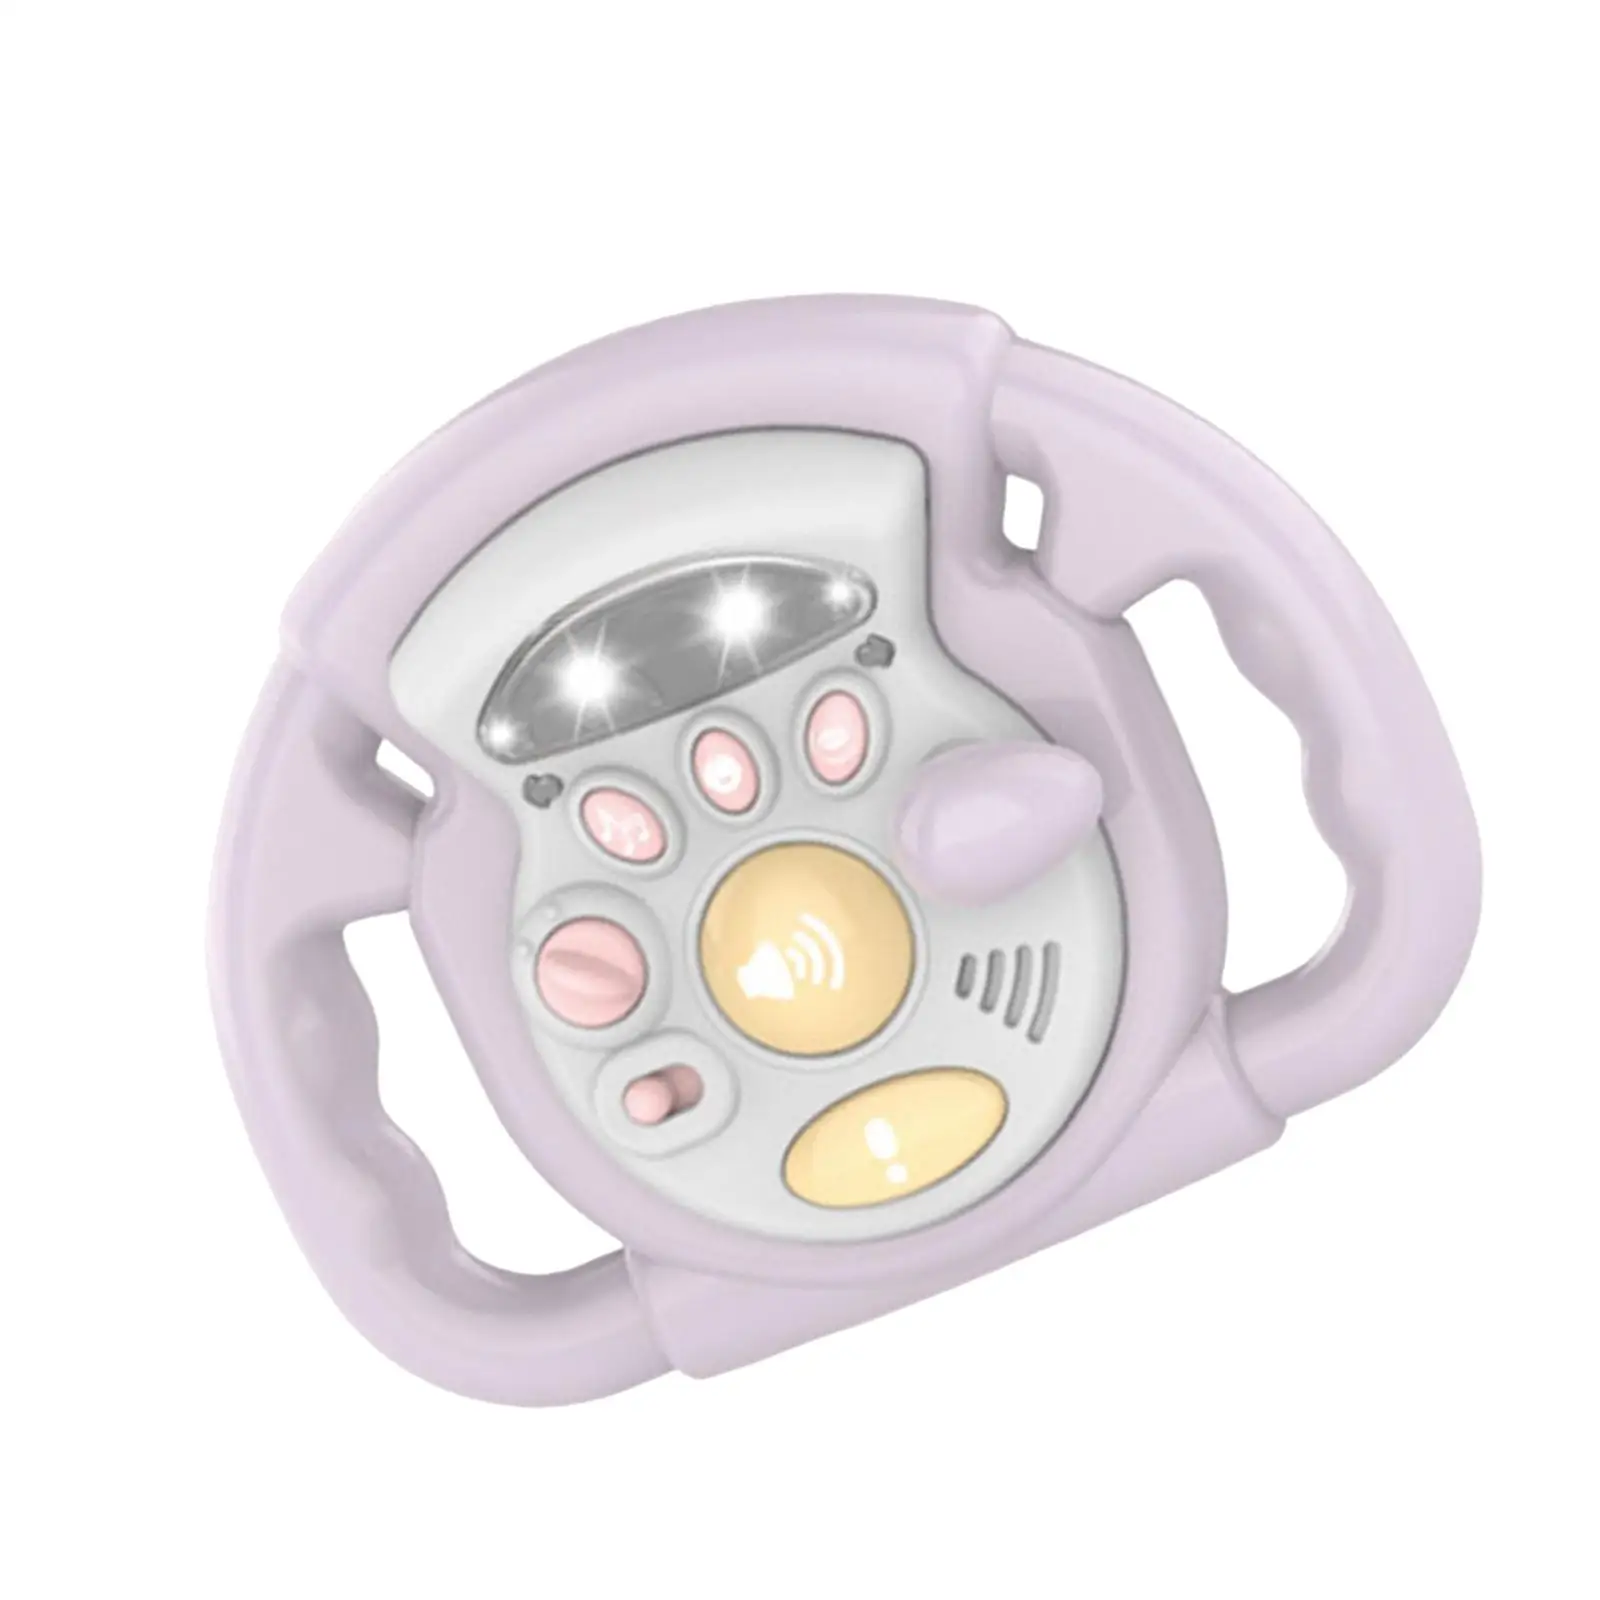 Simulation Copilots Steering Wheel Toys with Sound and Light for Toddlers